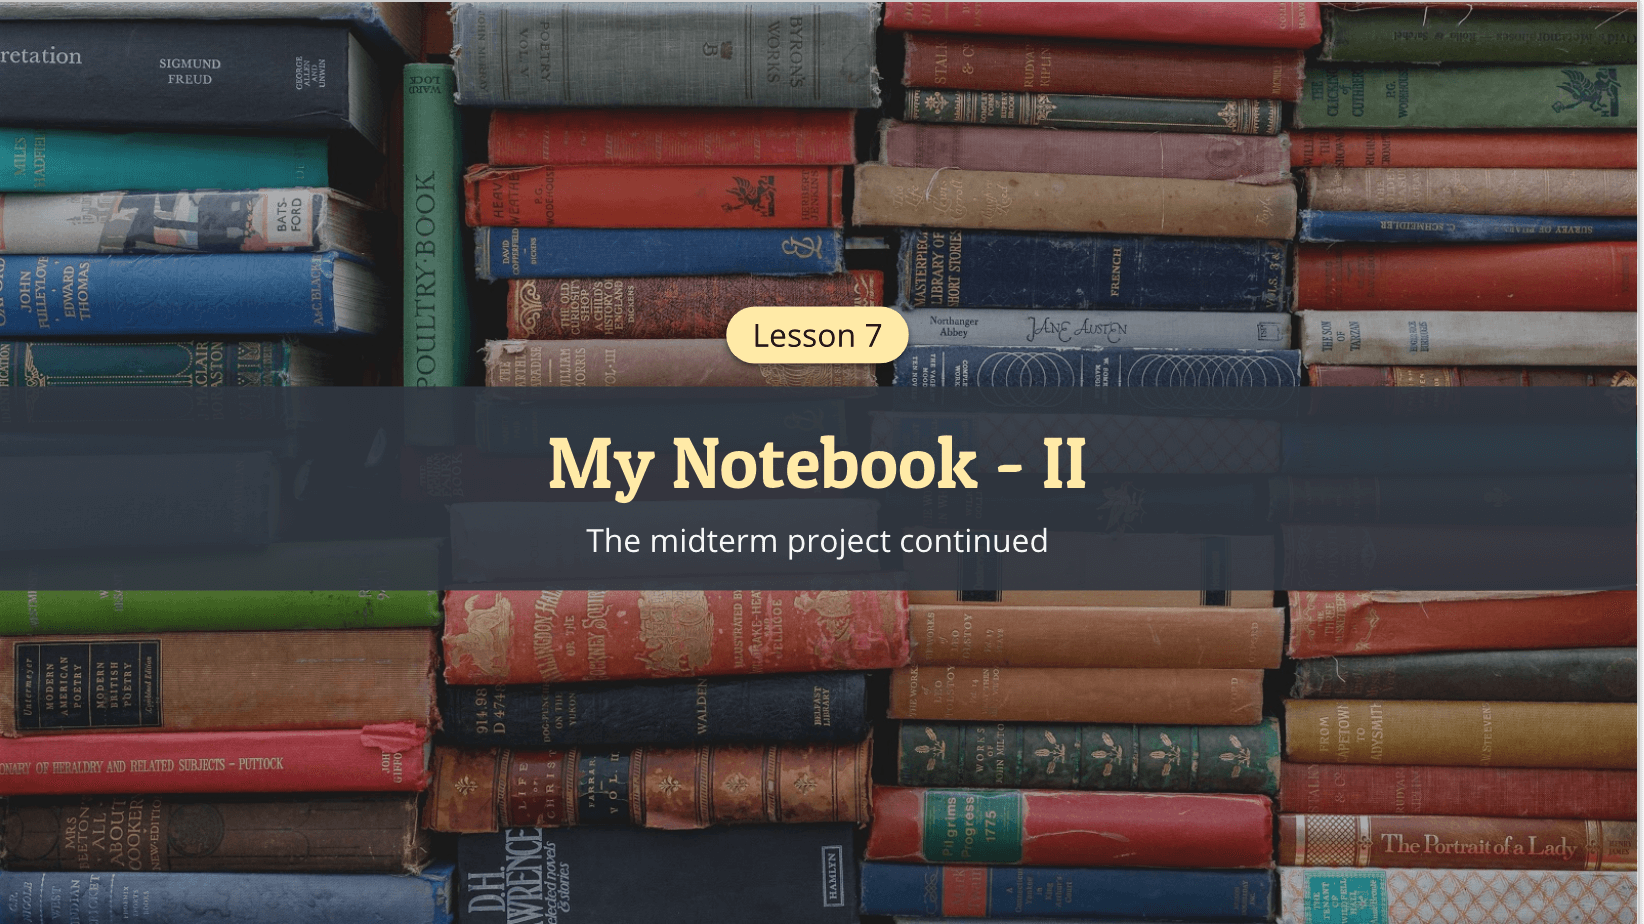 My Notebook II - Midterm Project